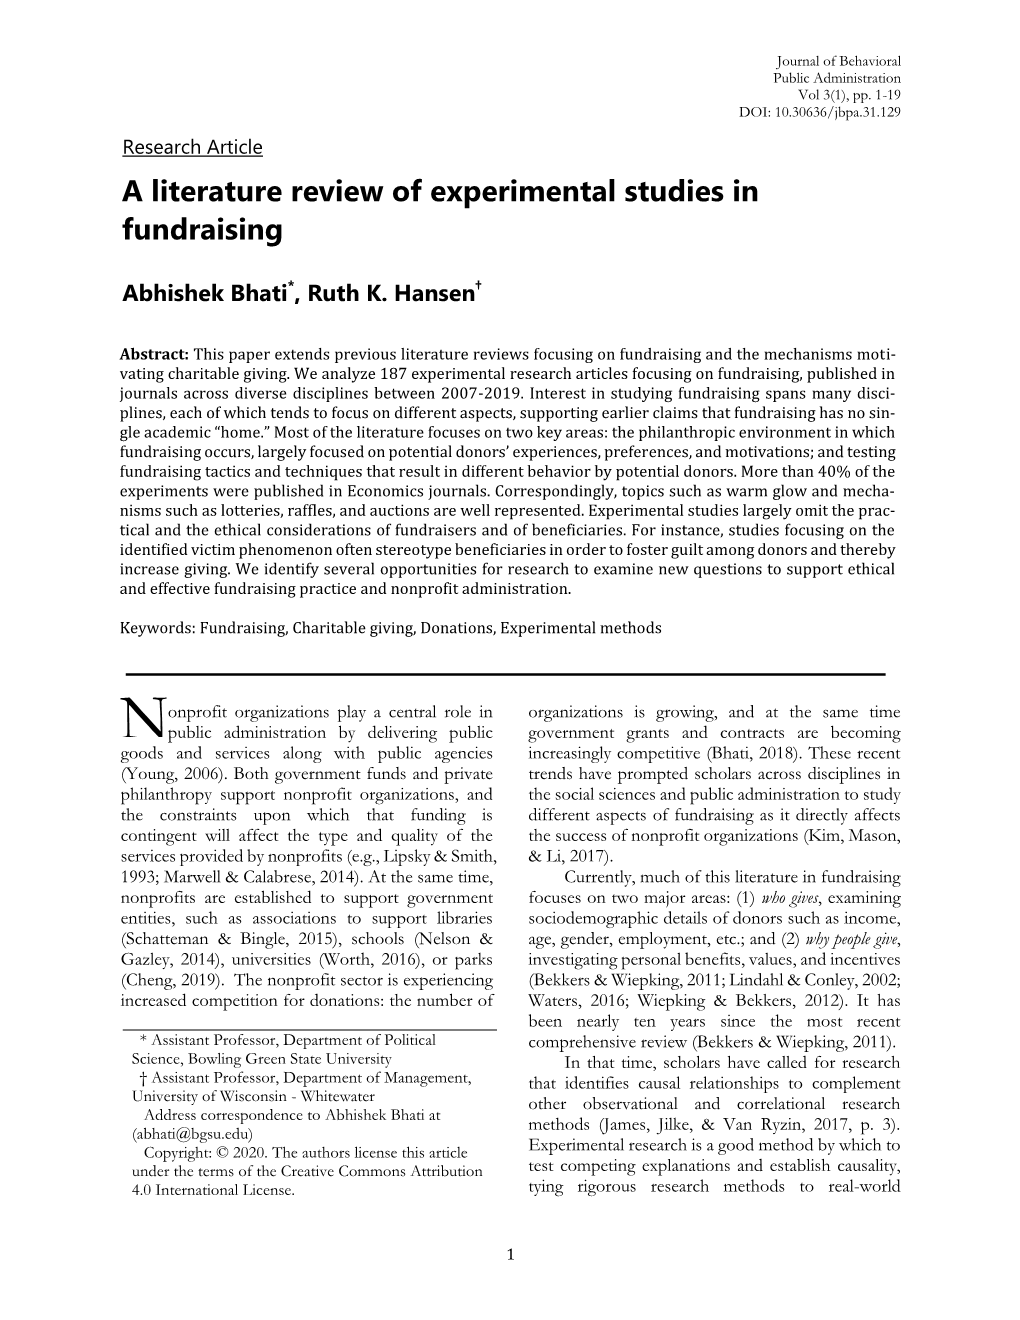 A Literature Review of Experimental Studies in Fundraising